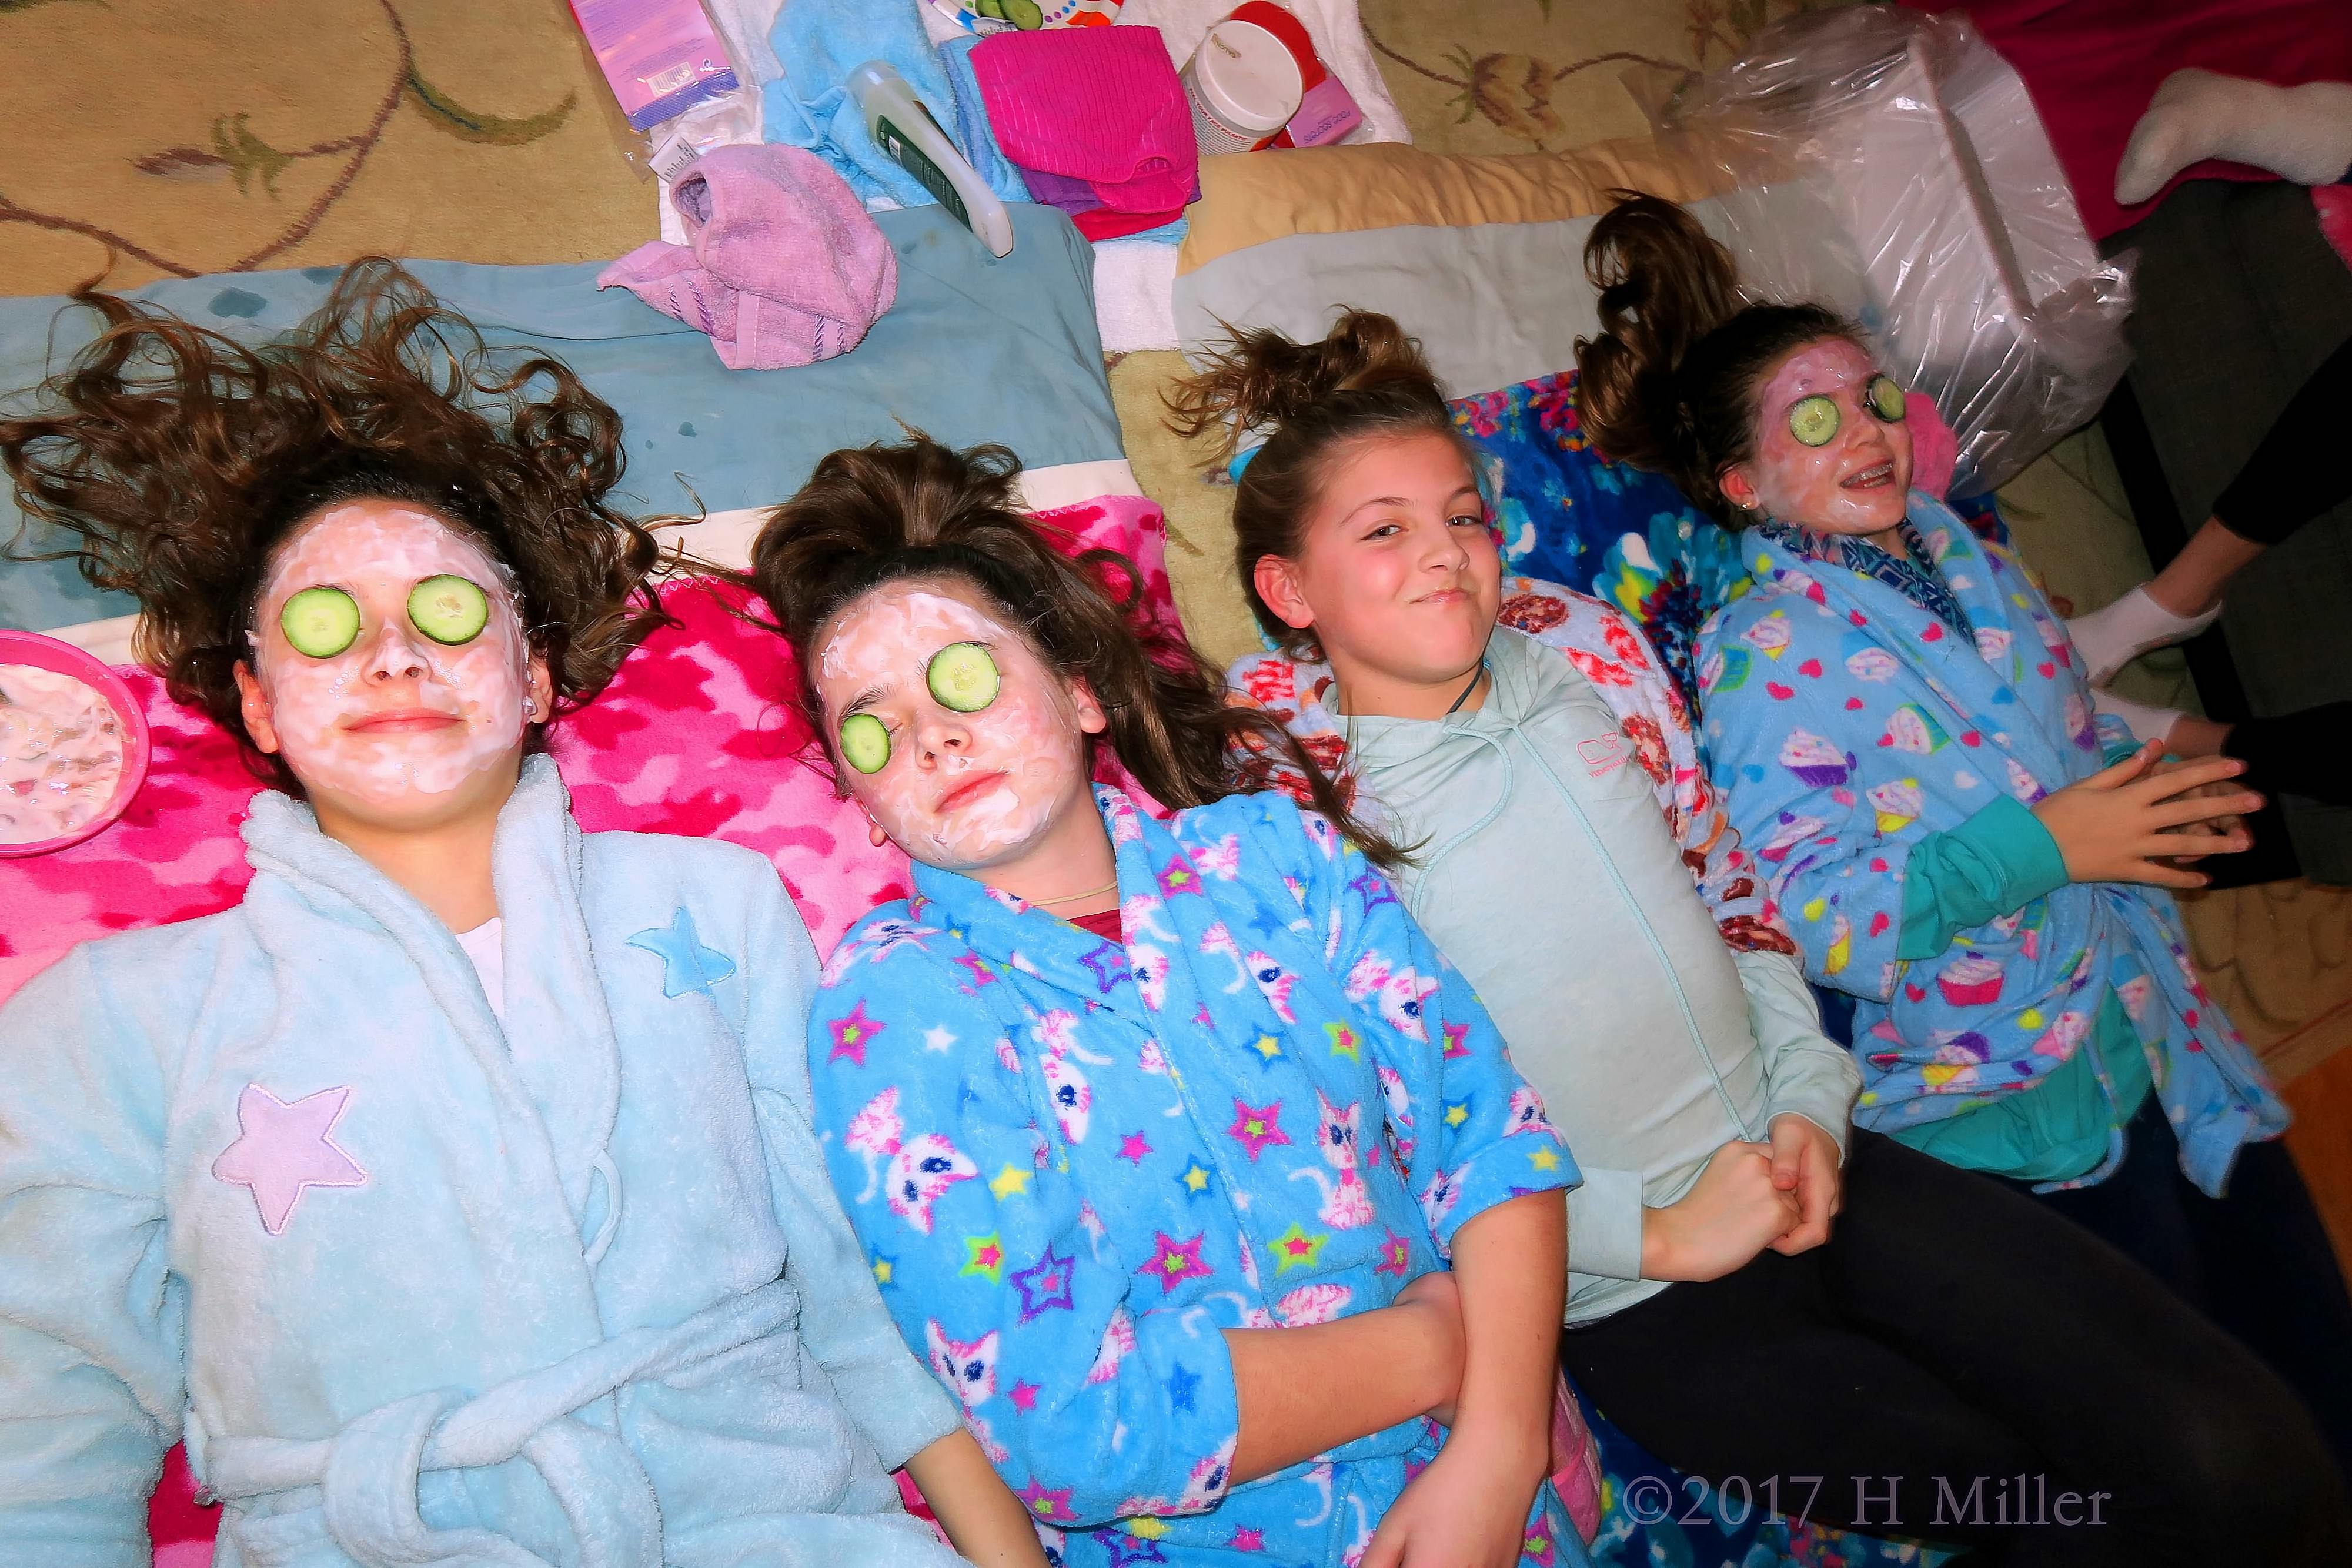 Having Facials For Kids With Friends Is So Much Fun! 4